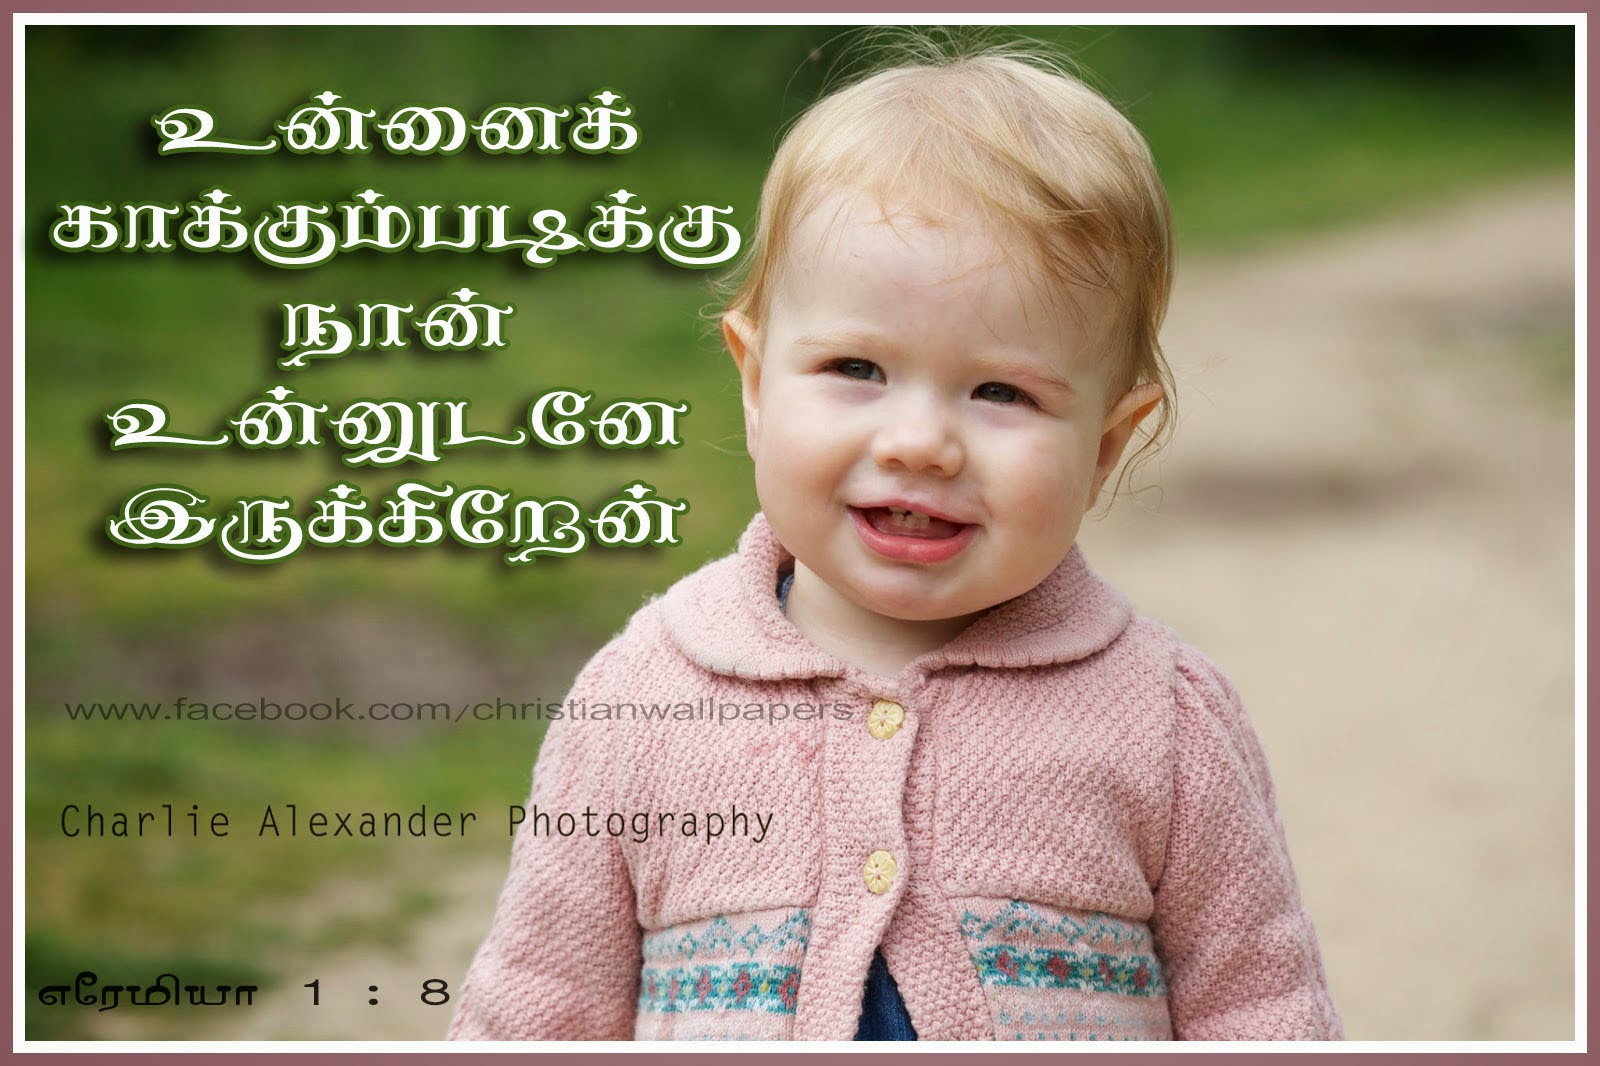 Tamil Christian Wallpapers: 2015 Blessing Bible Verse Tamil